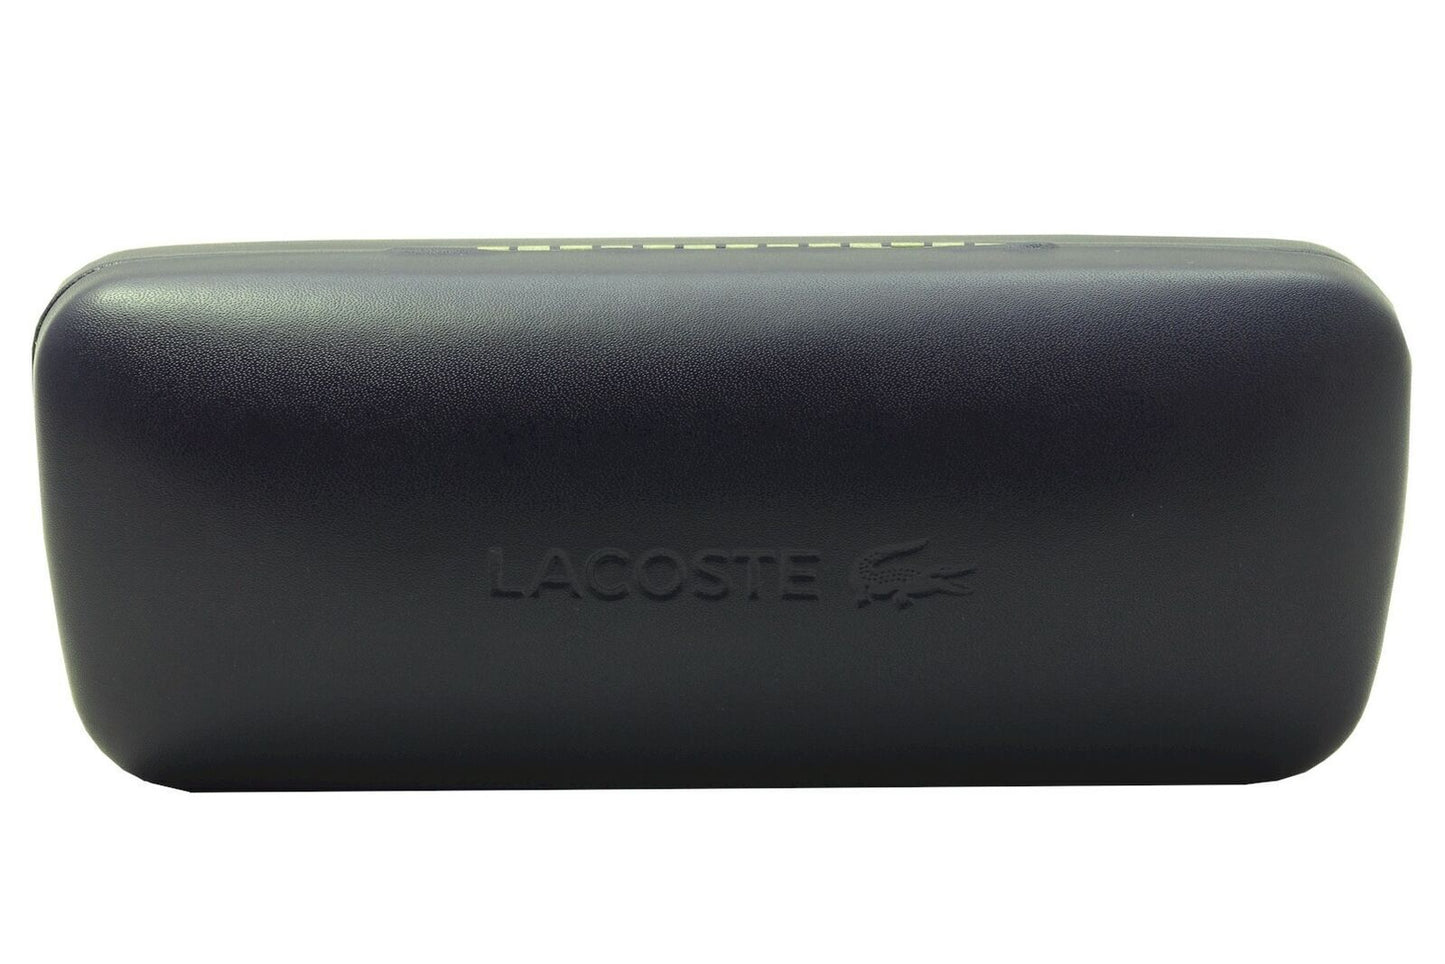 Lacoste L2603ND-215-5418 54mm New Eyeglasses